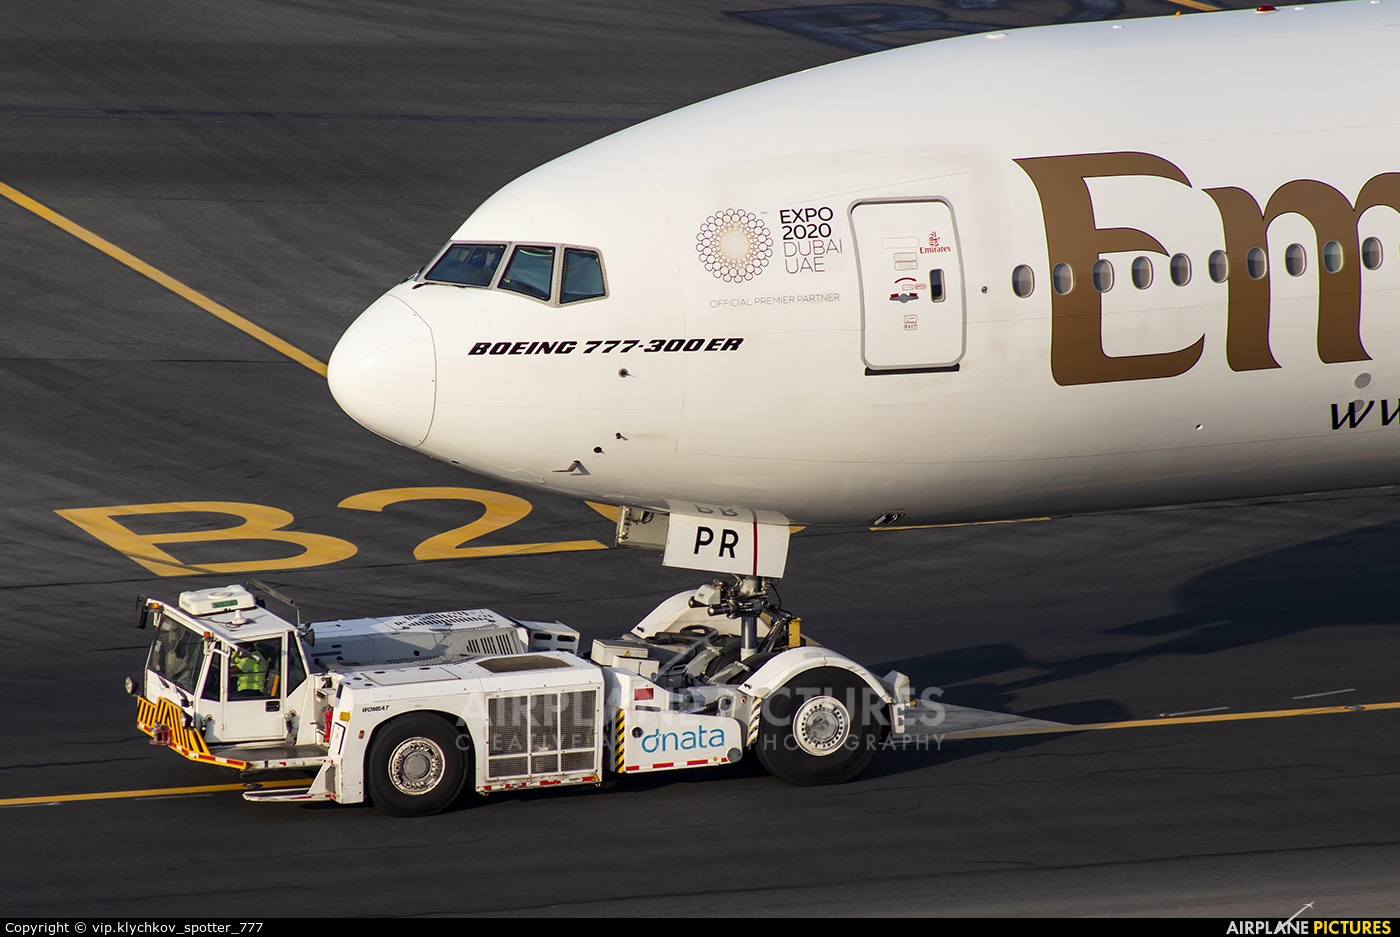 Emirates Airlines A6-EPR aircraft at Dubai Intl